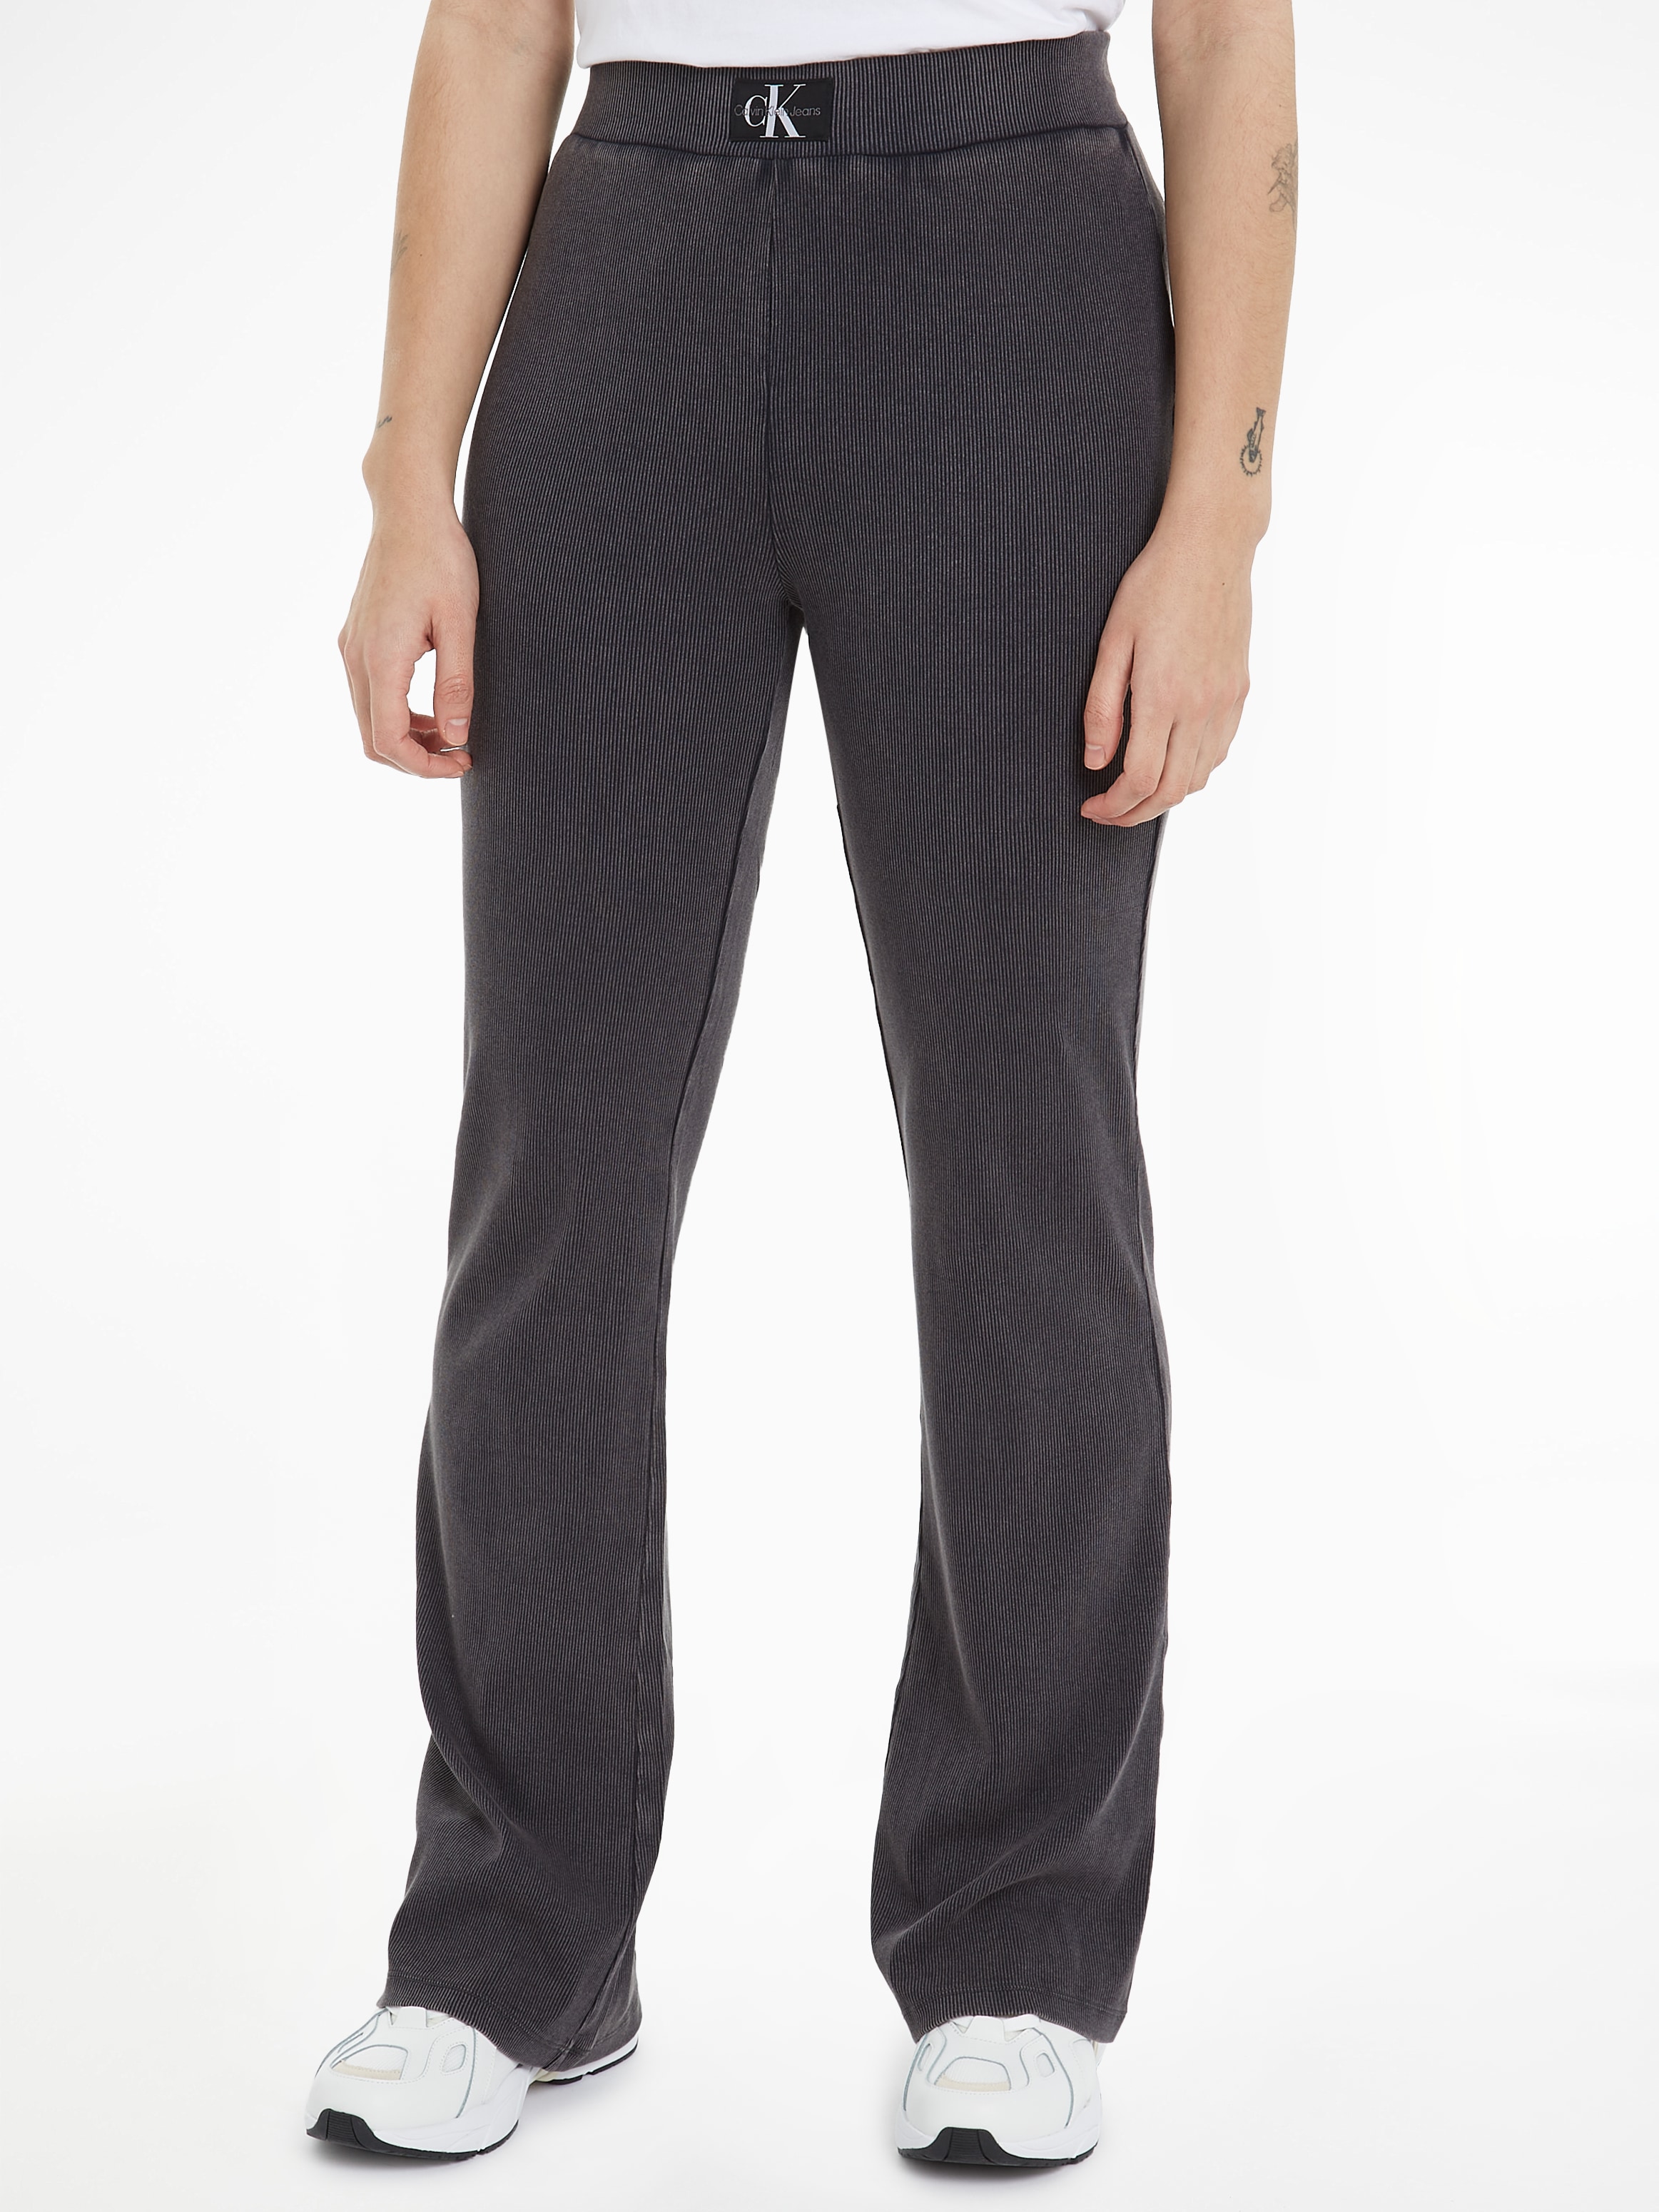 Relaxhose »WASHED RIB WOVEN LABEL PANT«, mit Markenlabel